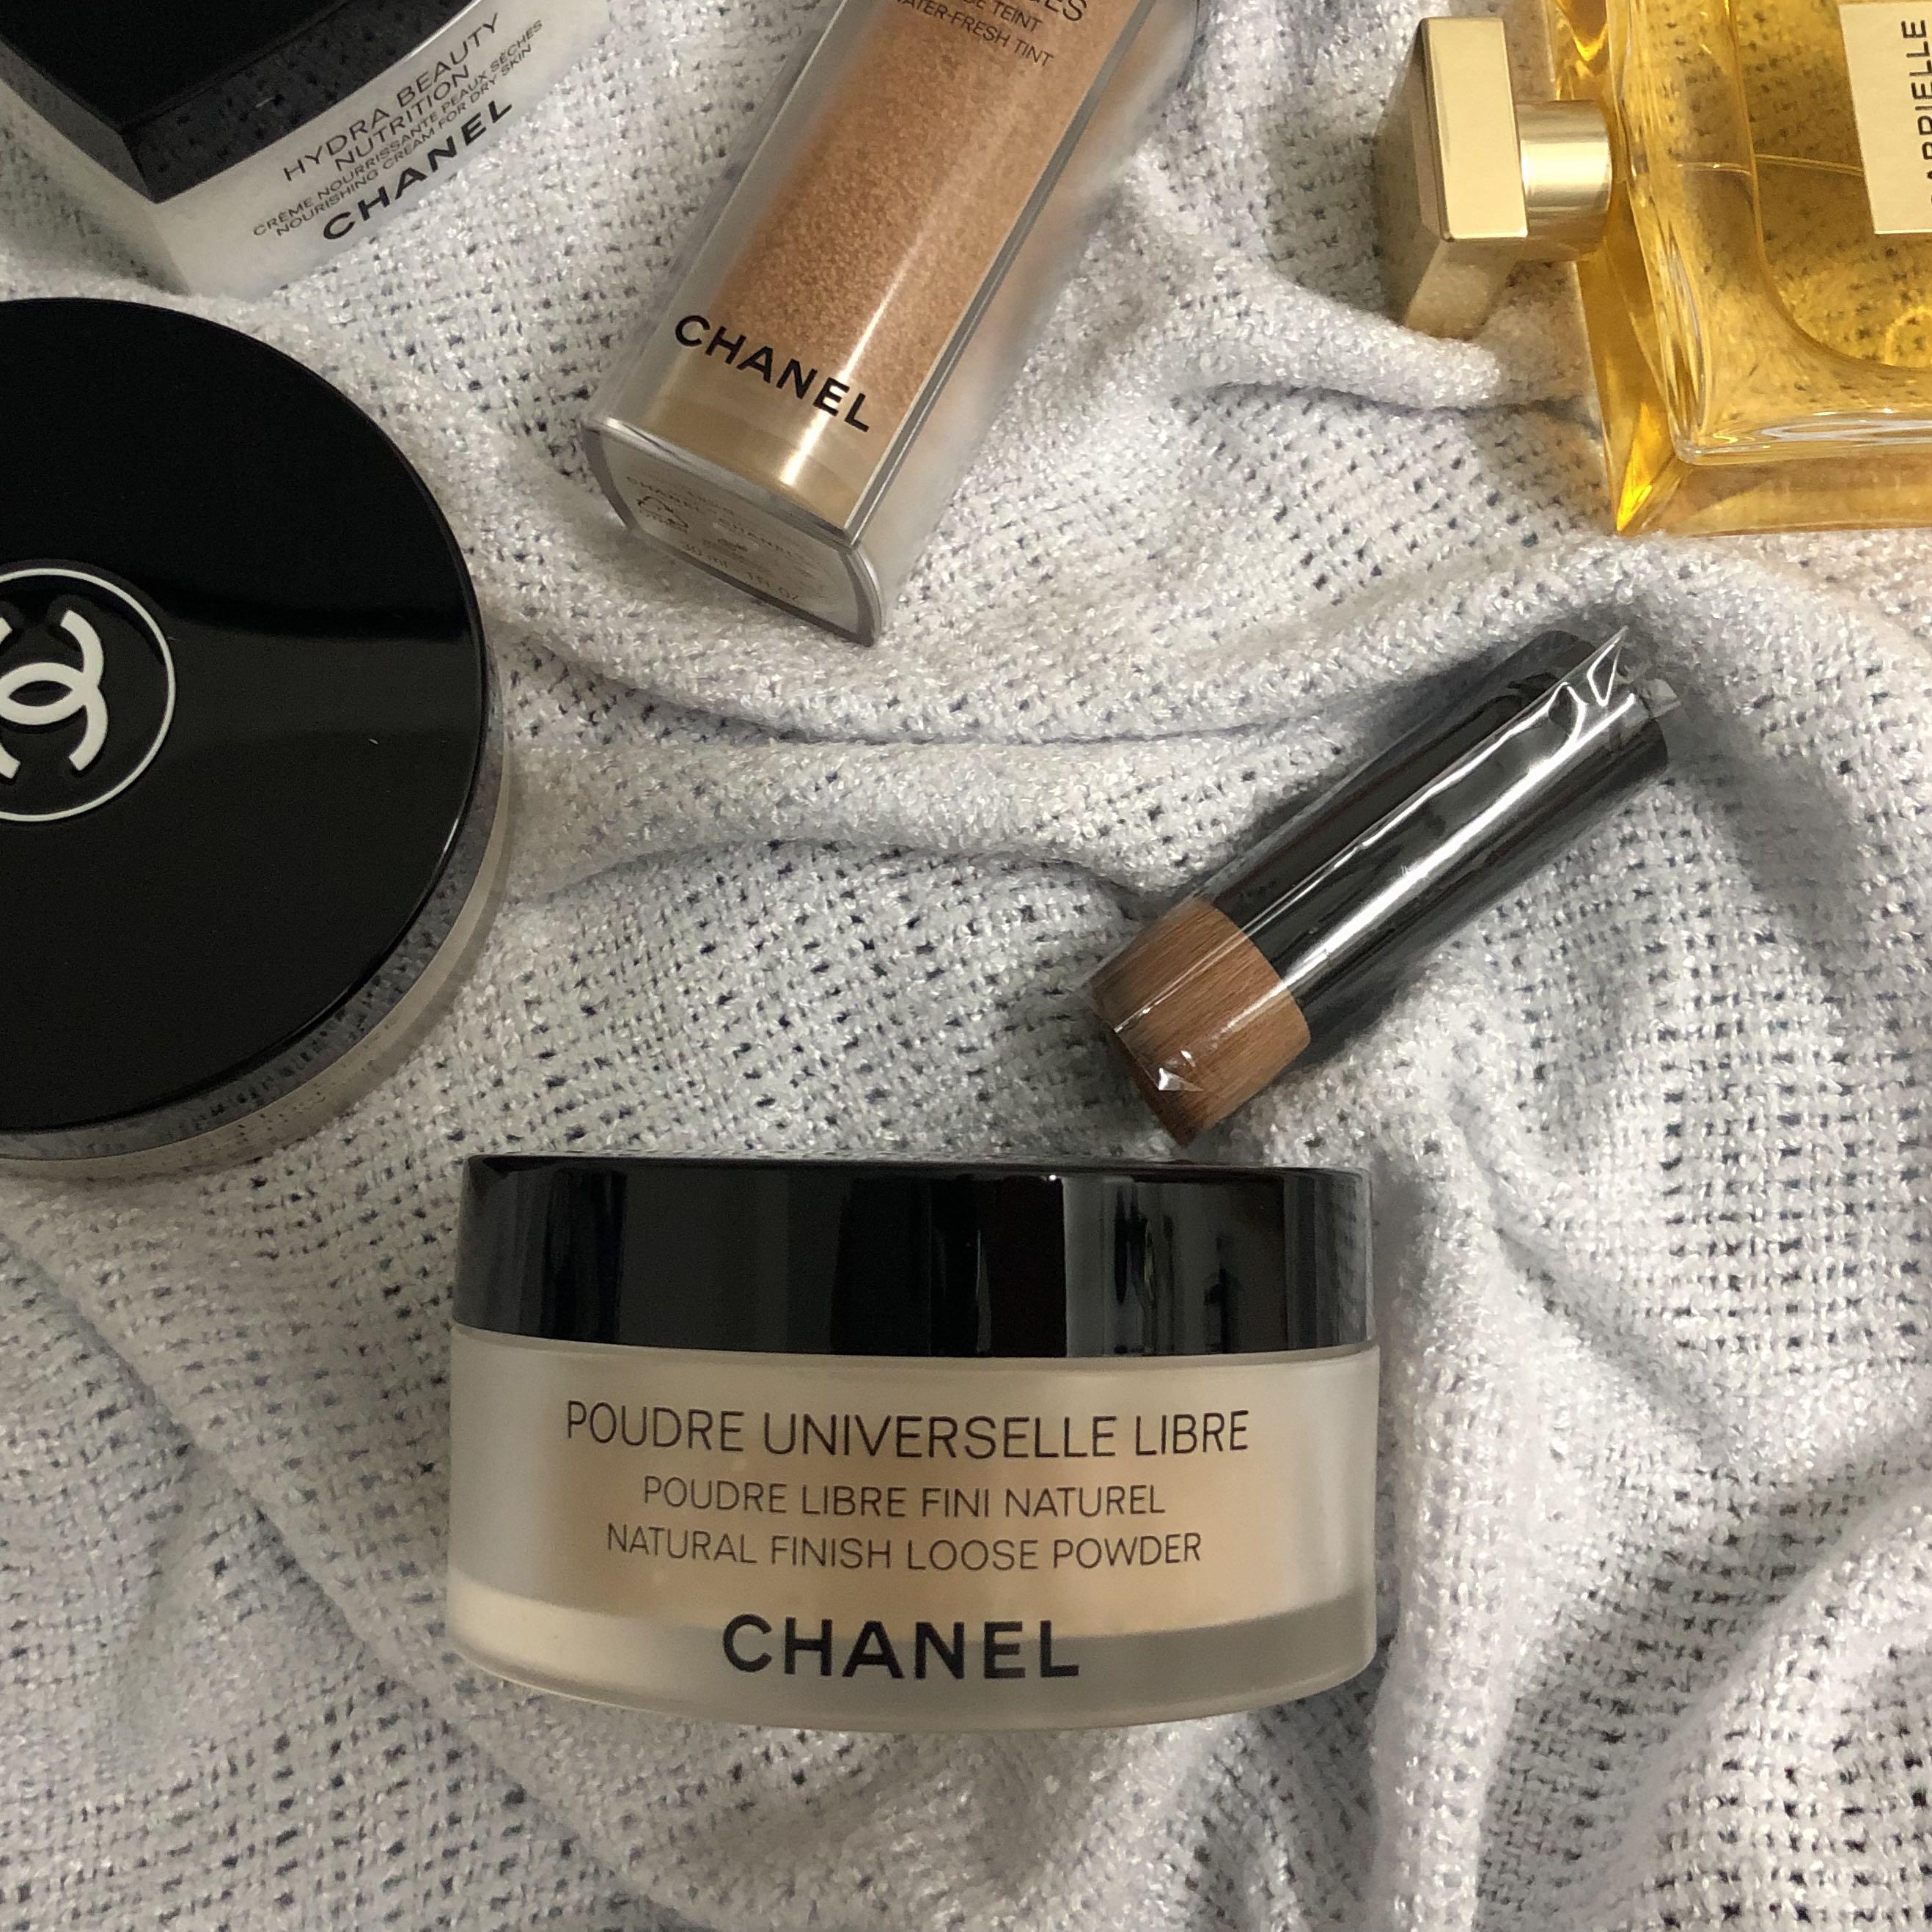 Unsung Heroes Chanel Poudres Universelle Libre Natural Finish Loose Powder   Makeup and Beauty Blog